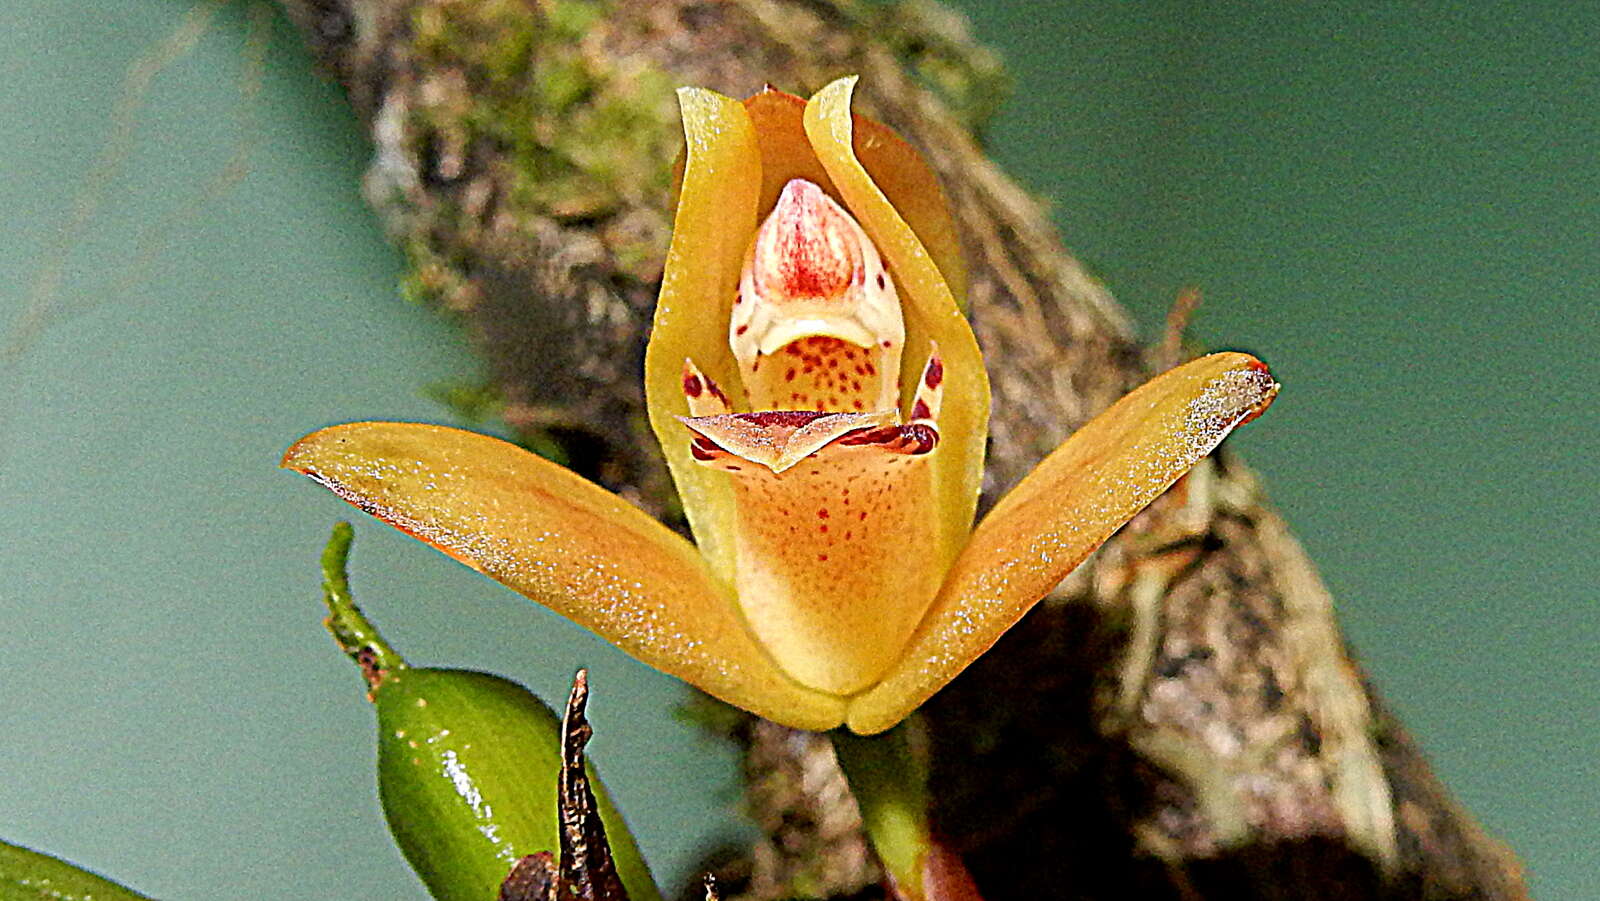 Image of Tiger orchids